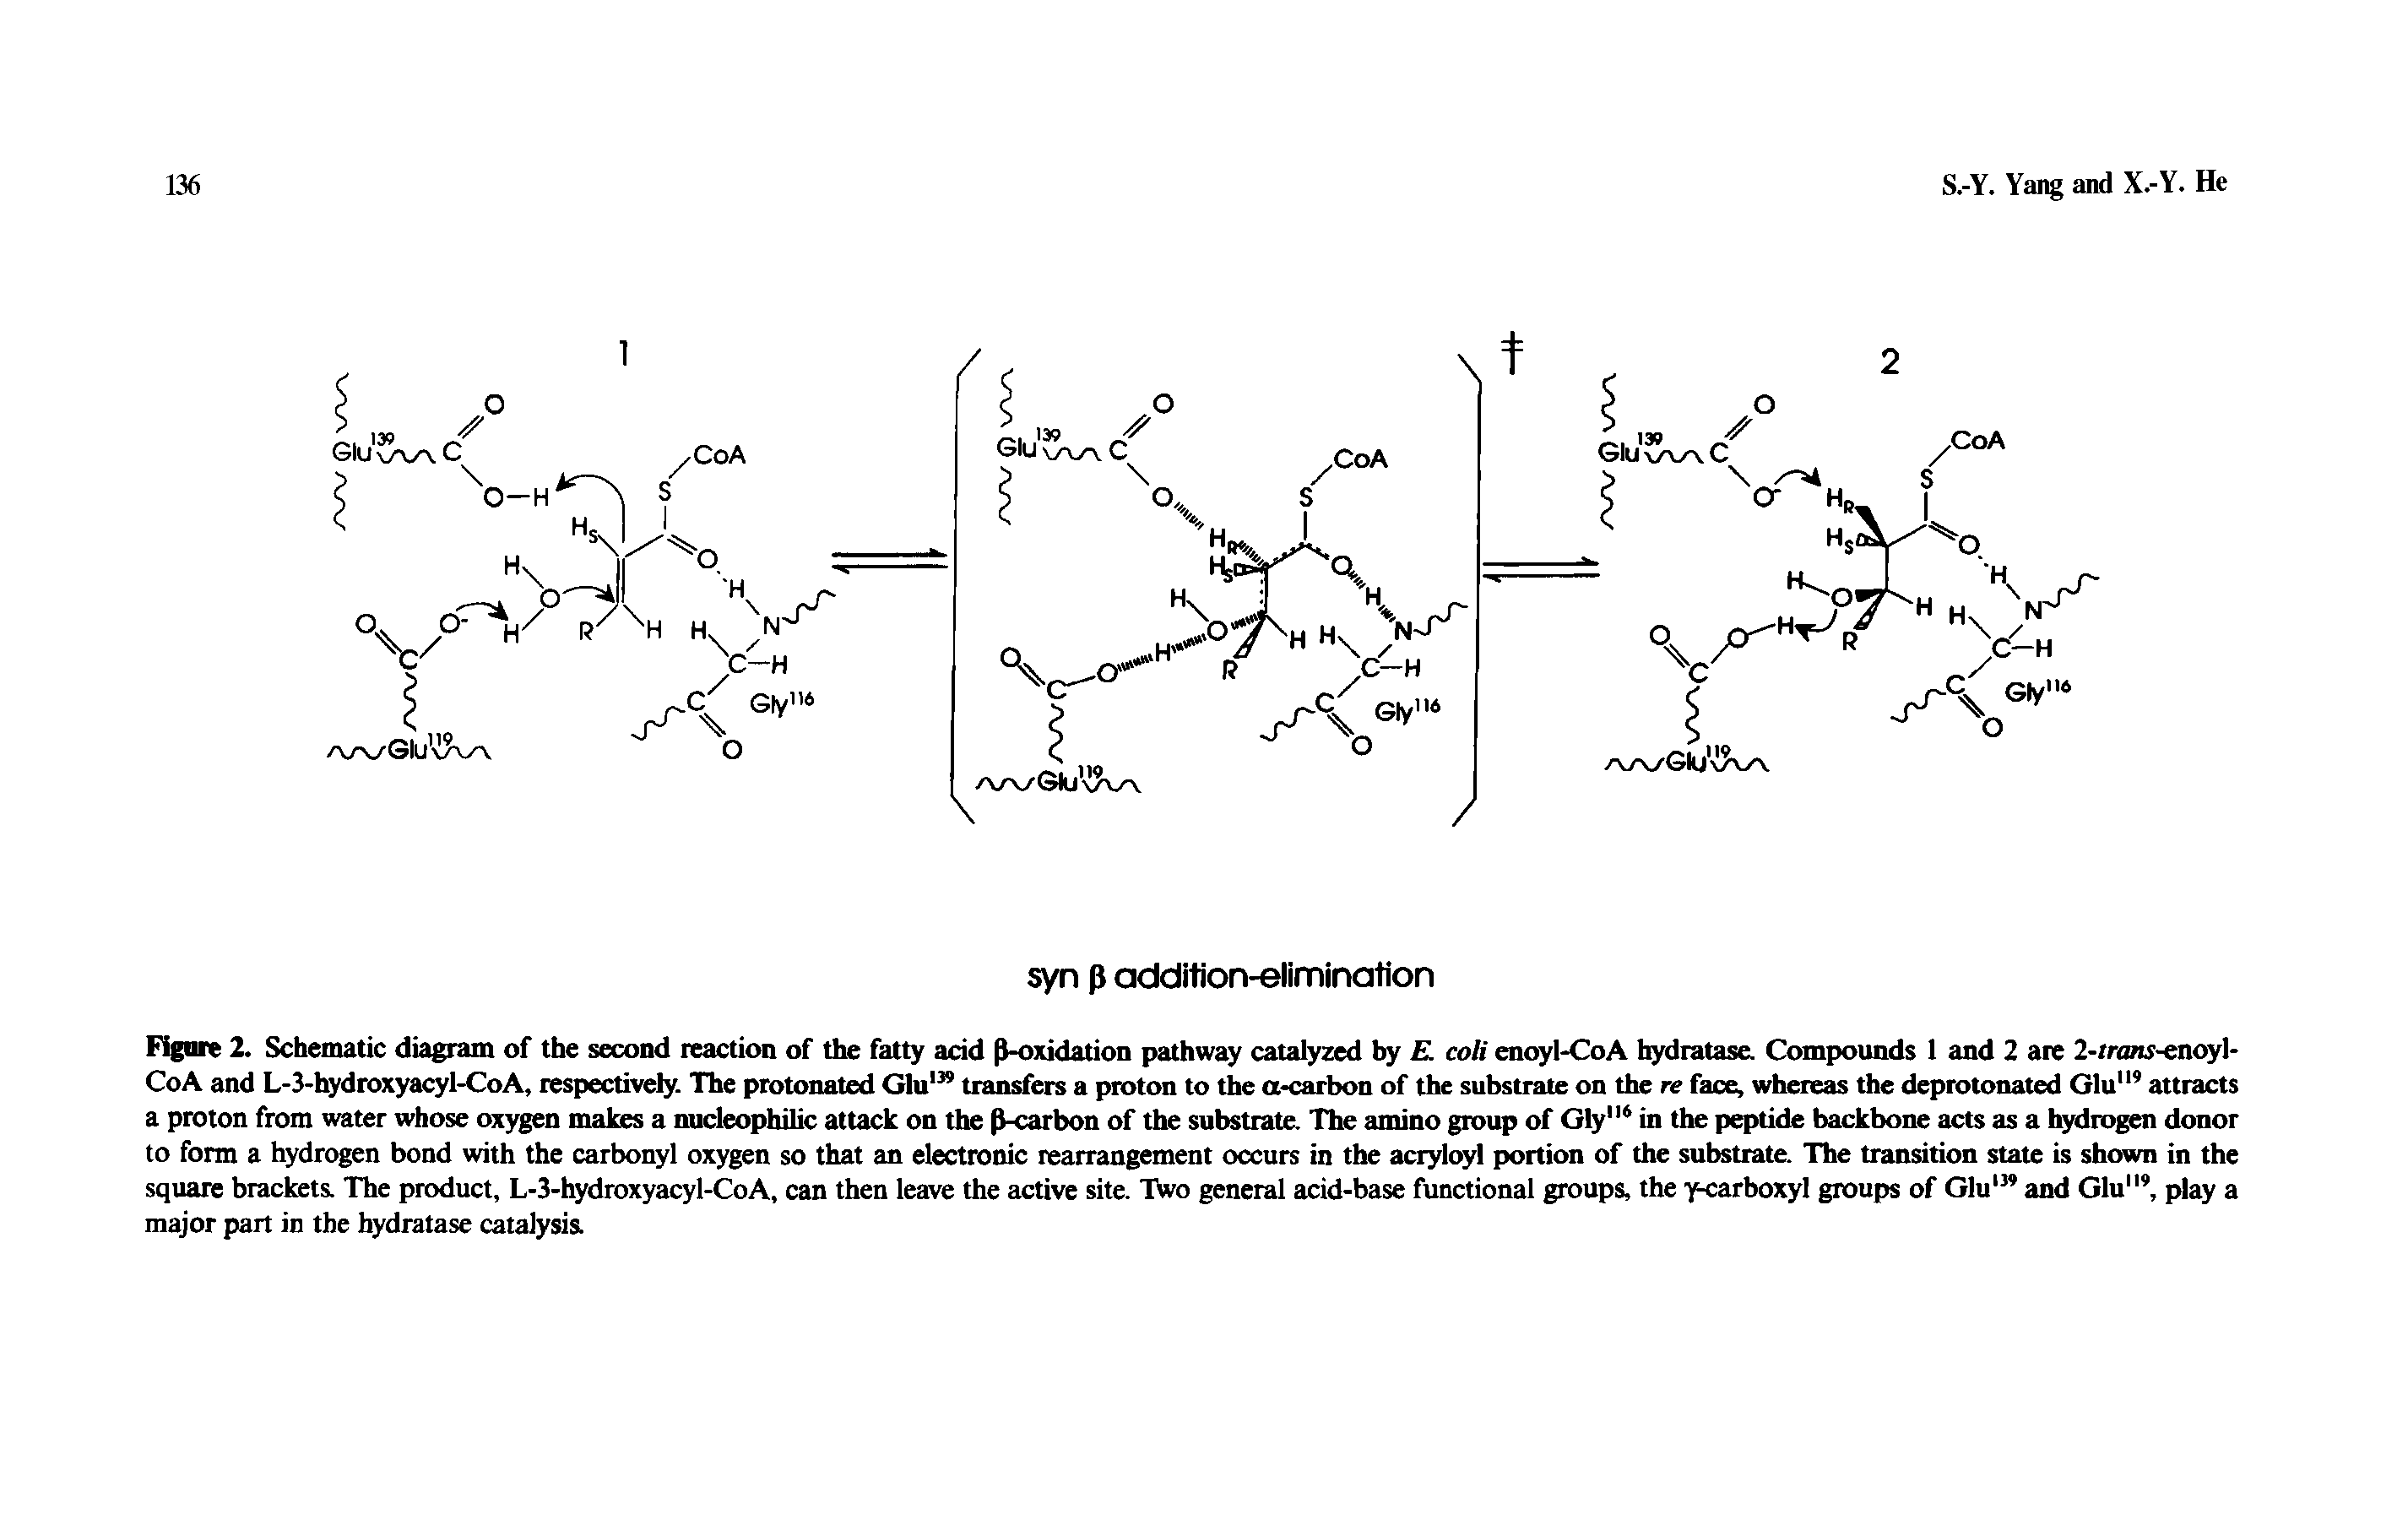 Figure 2. Schematic diagram of the second reaction of the fatty acid P-oxidation pathway catalyzed by co/i enoyl-CoA hydratase. Compounds 1 and 2 are 2-mmr-enoyl-CoA and L-3-hydroxyacyl-CoA, respectively. The protonated Glu transfers a proton to the a carbon of the substrate on the re face, whereas the deprotonated Glu" attracts a proton from water whose oxygen makes a nudeopbilic attack on the P-carbon of the substrate. The amino group of Gly" in the peptide backbone acts as a l rogen donor to form a hydrogen bond with the carbonyl oxygen so that an electronic rearrangement occurs in the acryloyl portion of the sul trate. The transition state is shown in the square brackets The product, L-3-hydroxyacyl-CoA, can then leave the active site. Two general acid-base functional groups, the ycarboxyl groups of Glu and Glu , play a major part in the hydratase catalysis...